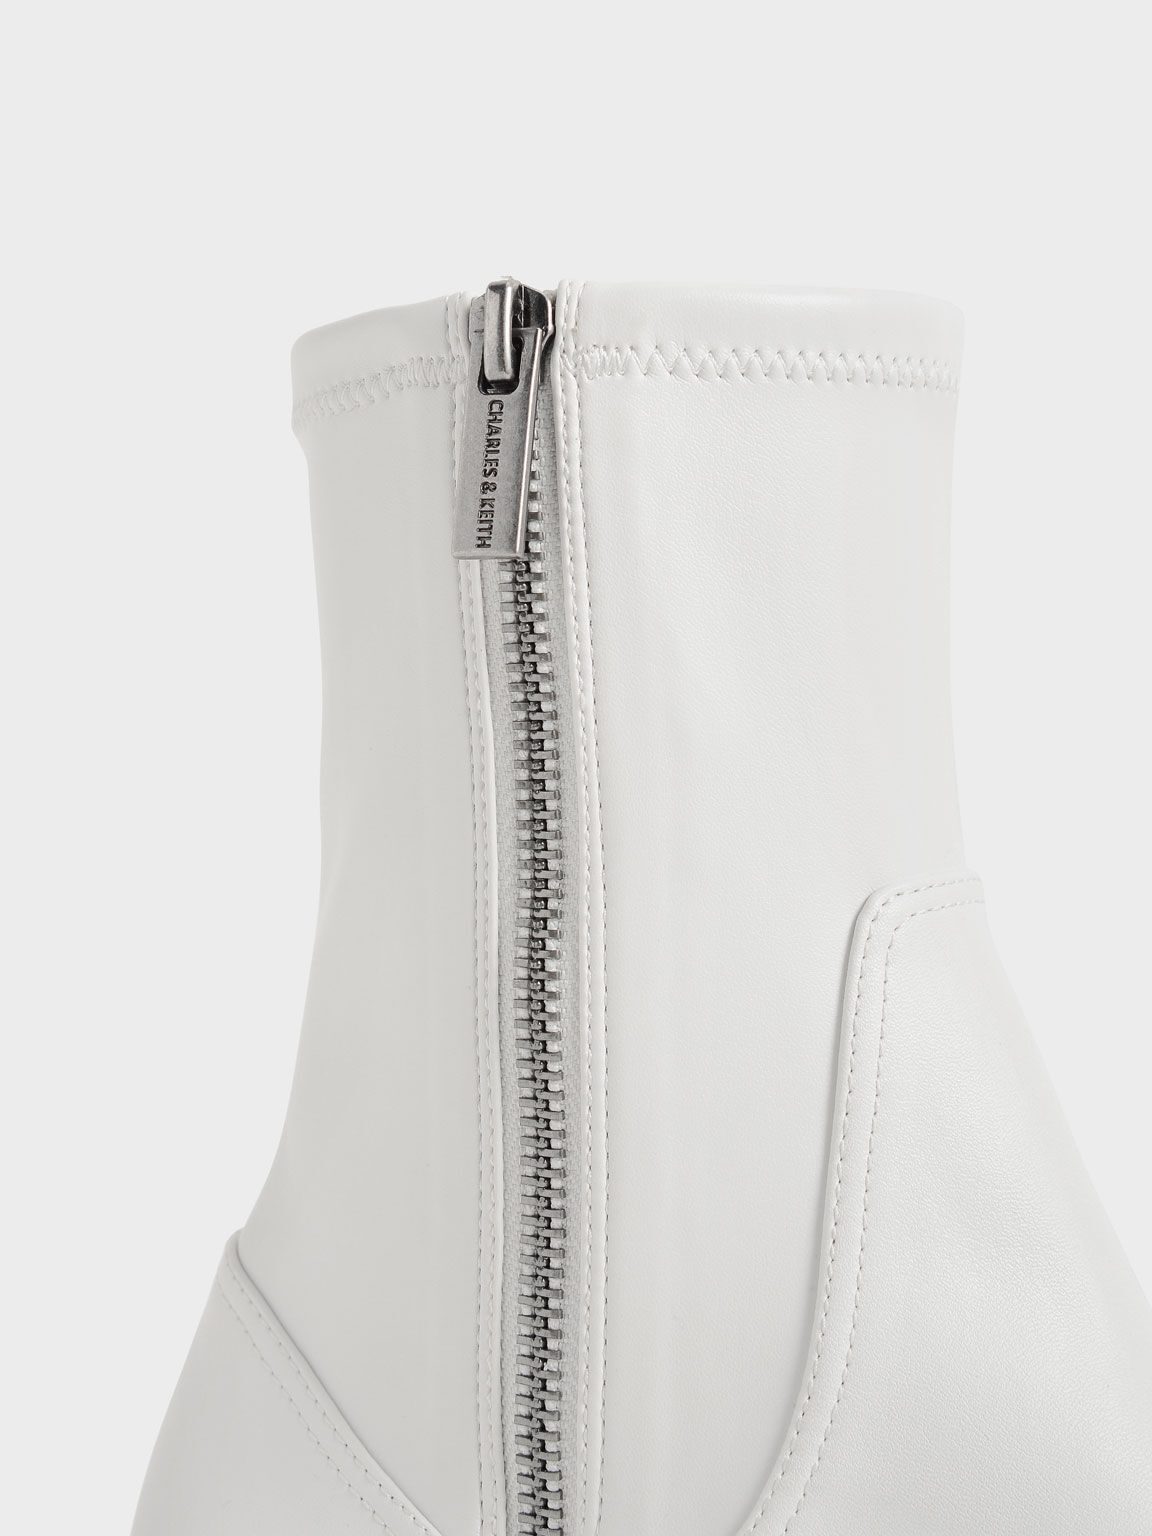 Imogen Side-Zip Ankle Boots, White, hi-res